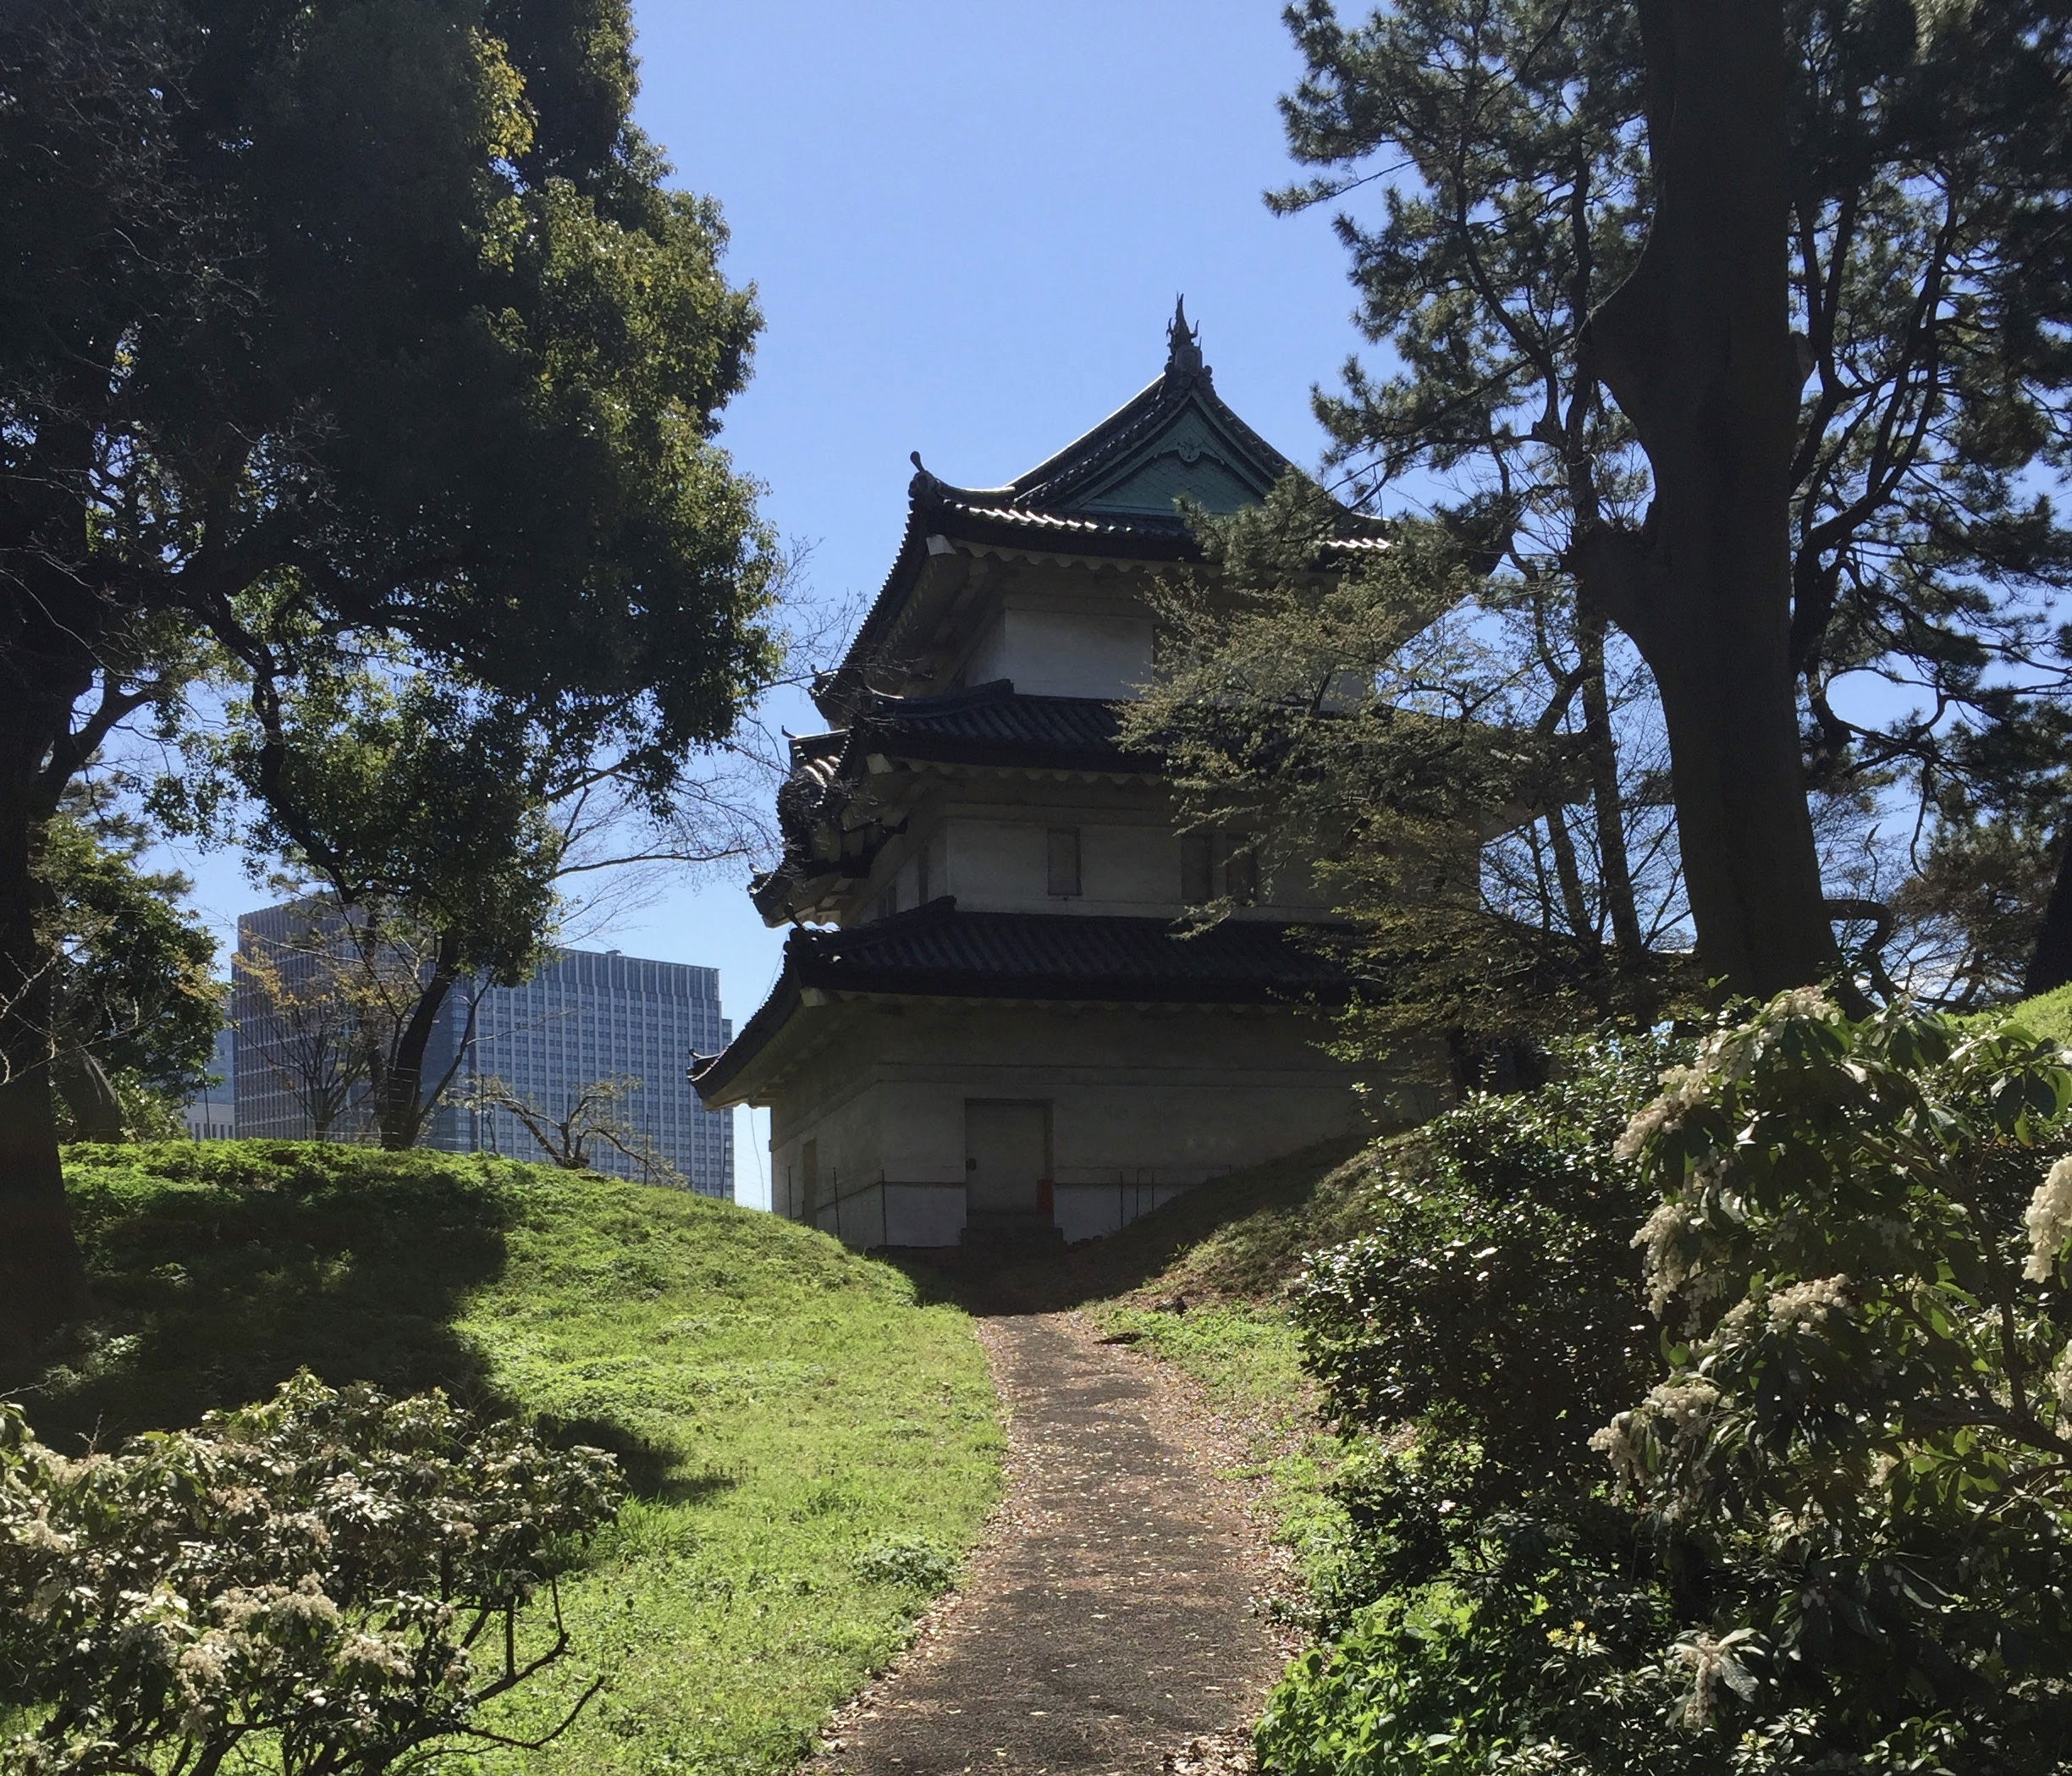 Wandering around the Imperial Palace in Tokyo